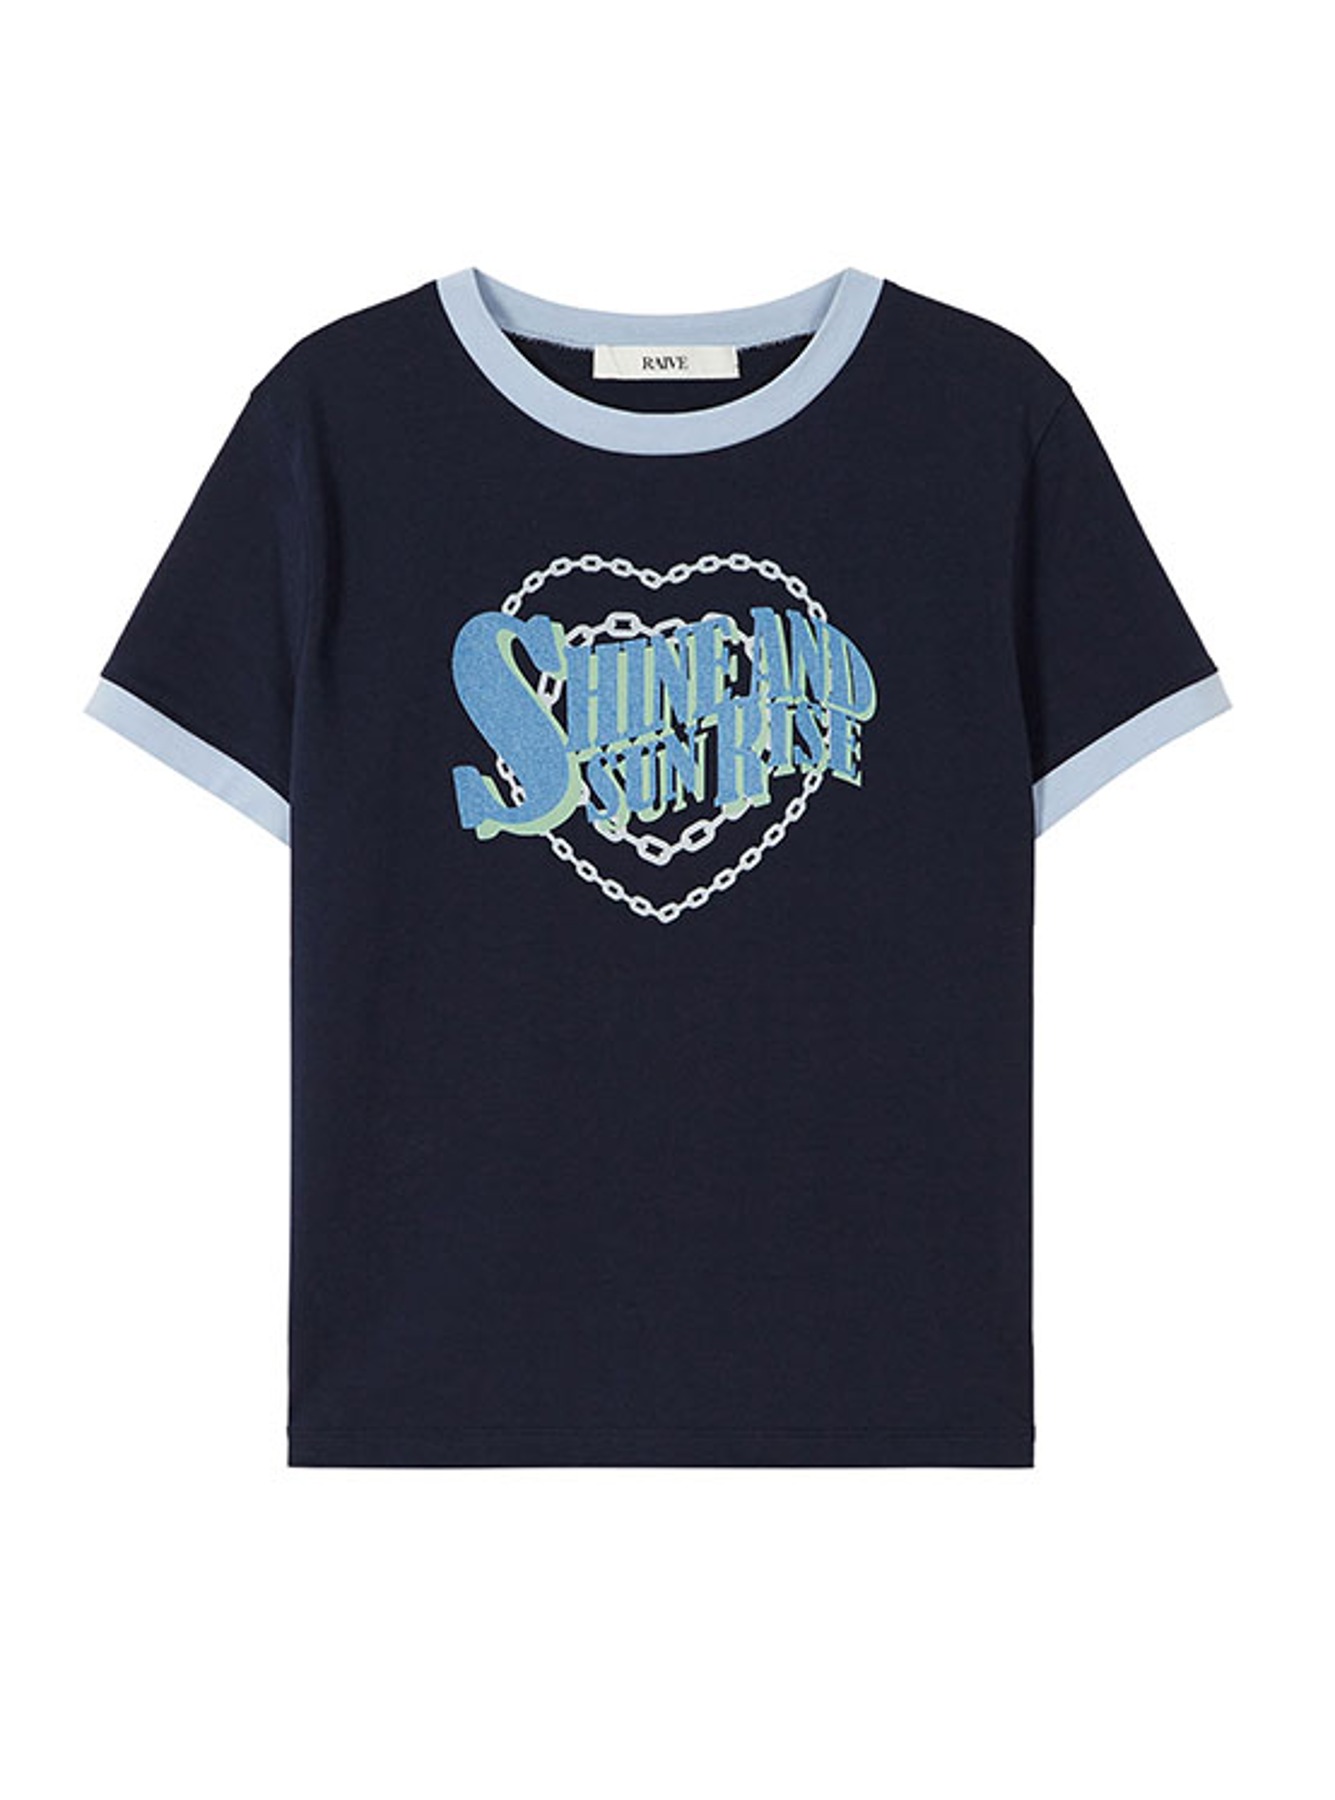 Shine Heart Graphic T-shirt in Navy VW3ME261-23